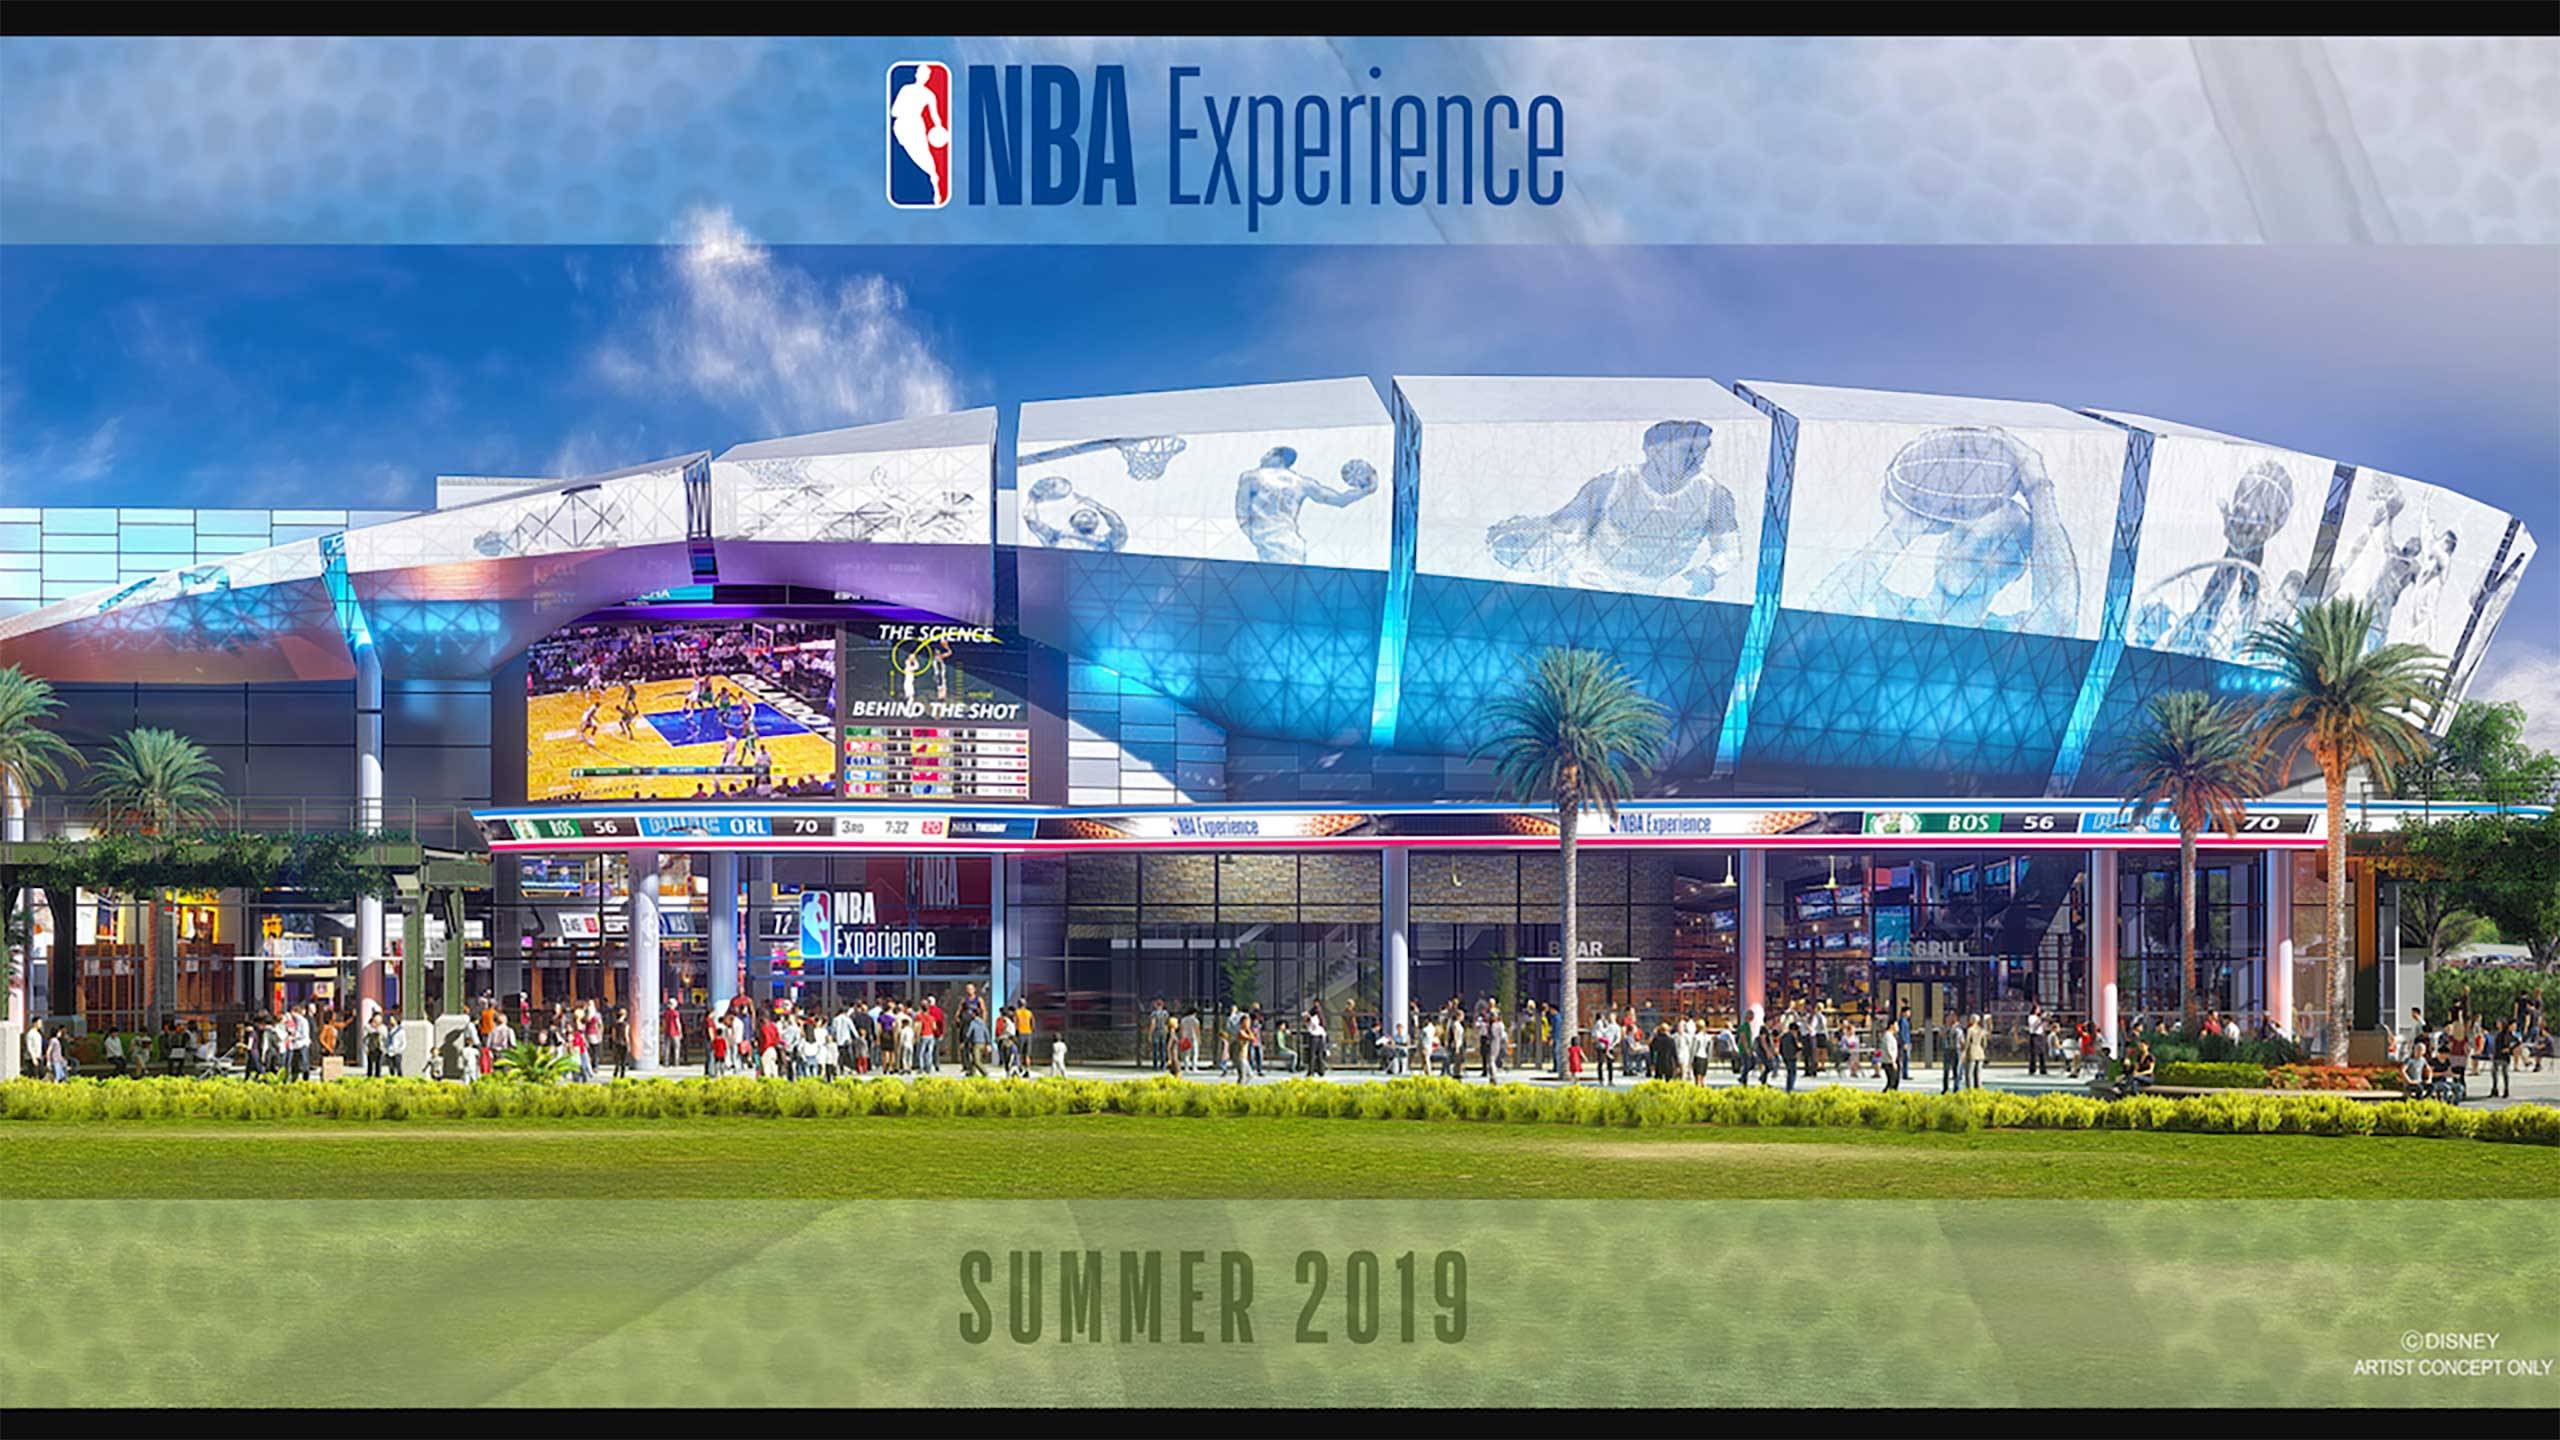 Annual Passholder discount now available at the NBA Experience